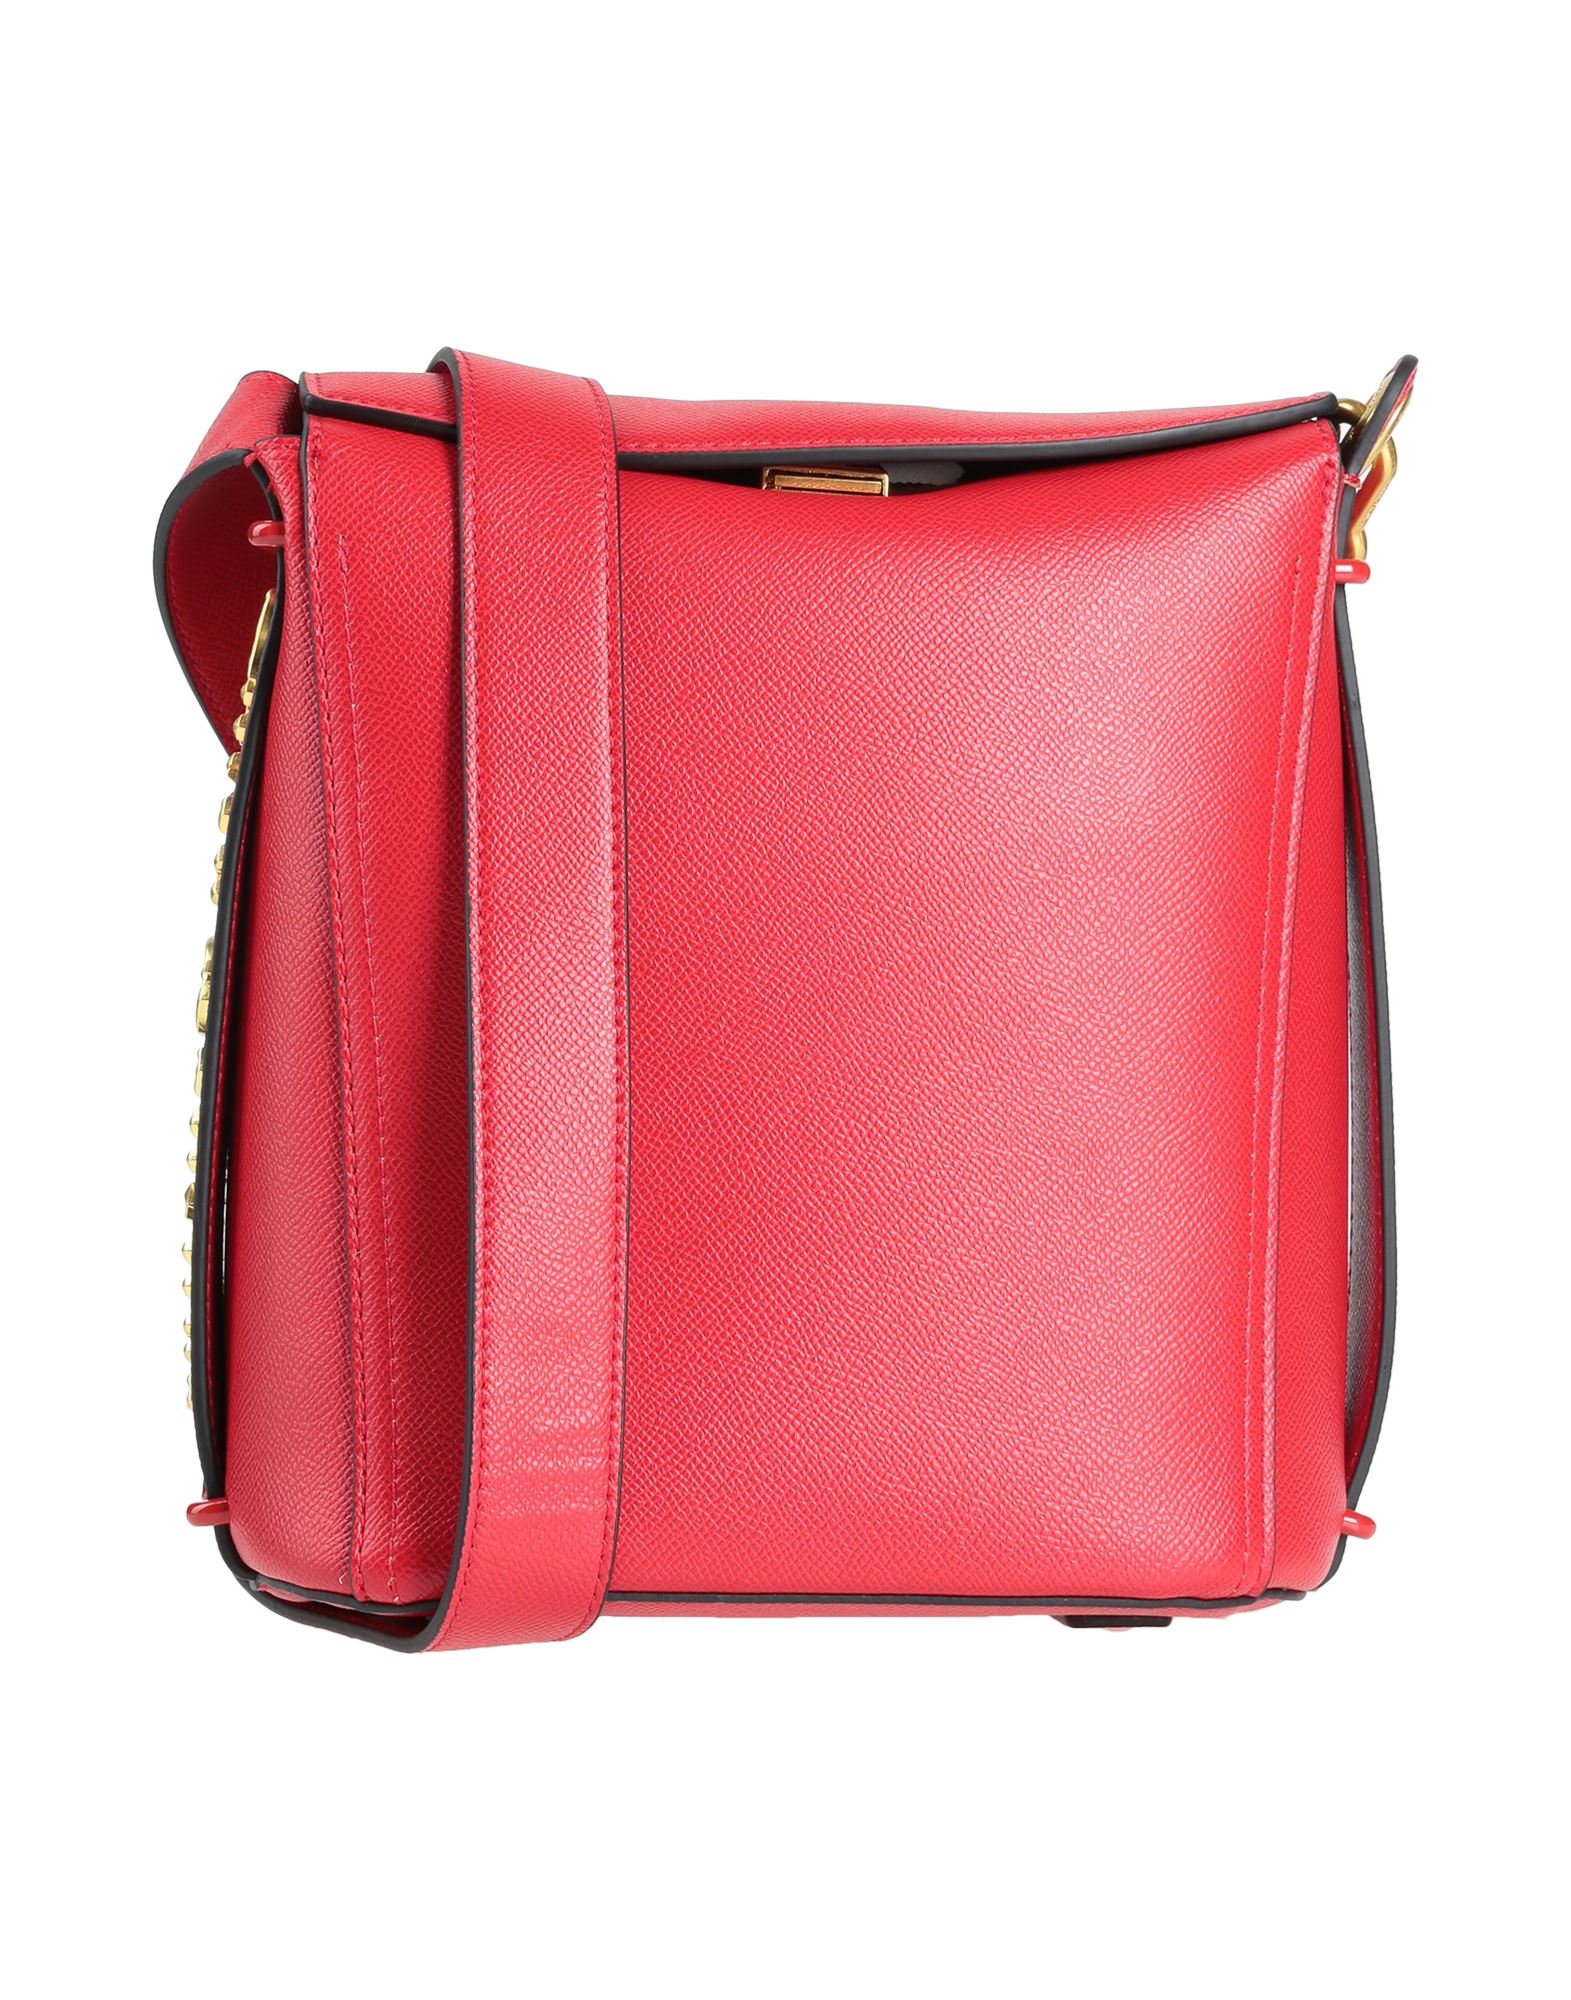 Juicy Couture Handbags In Red